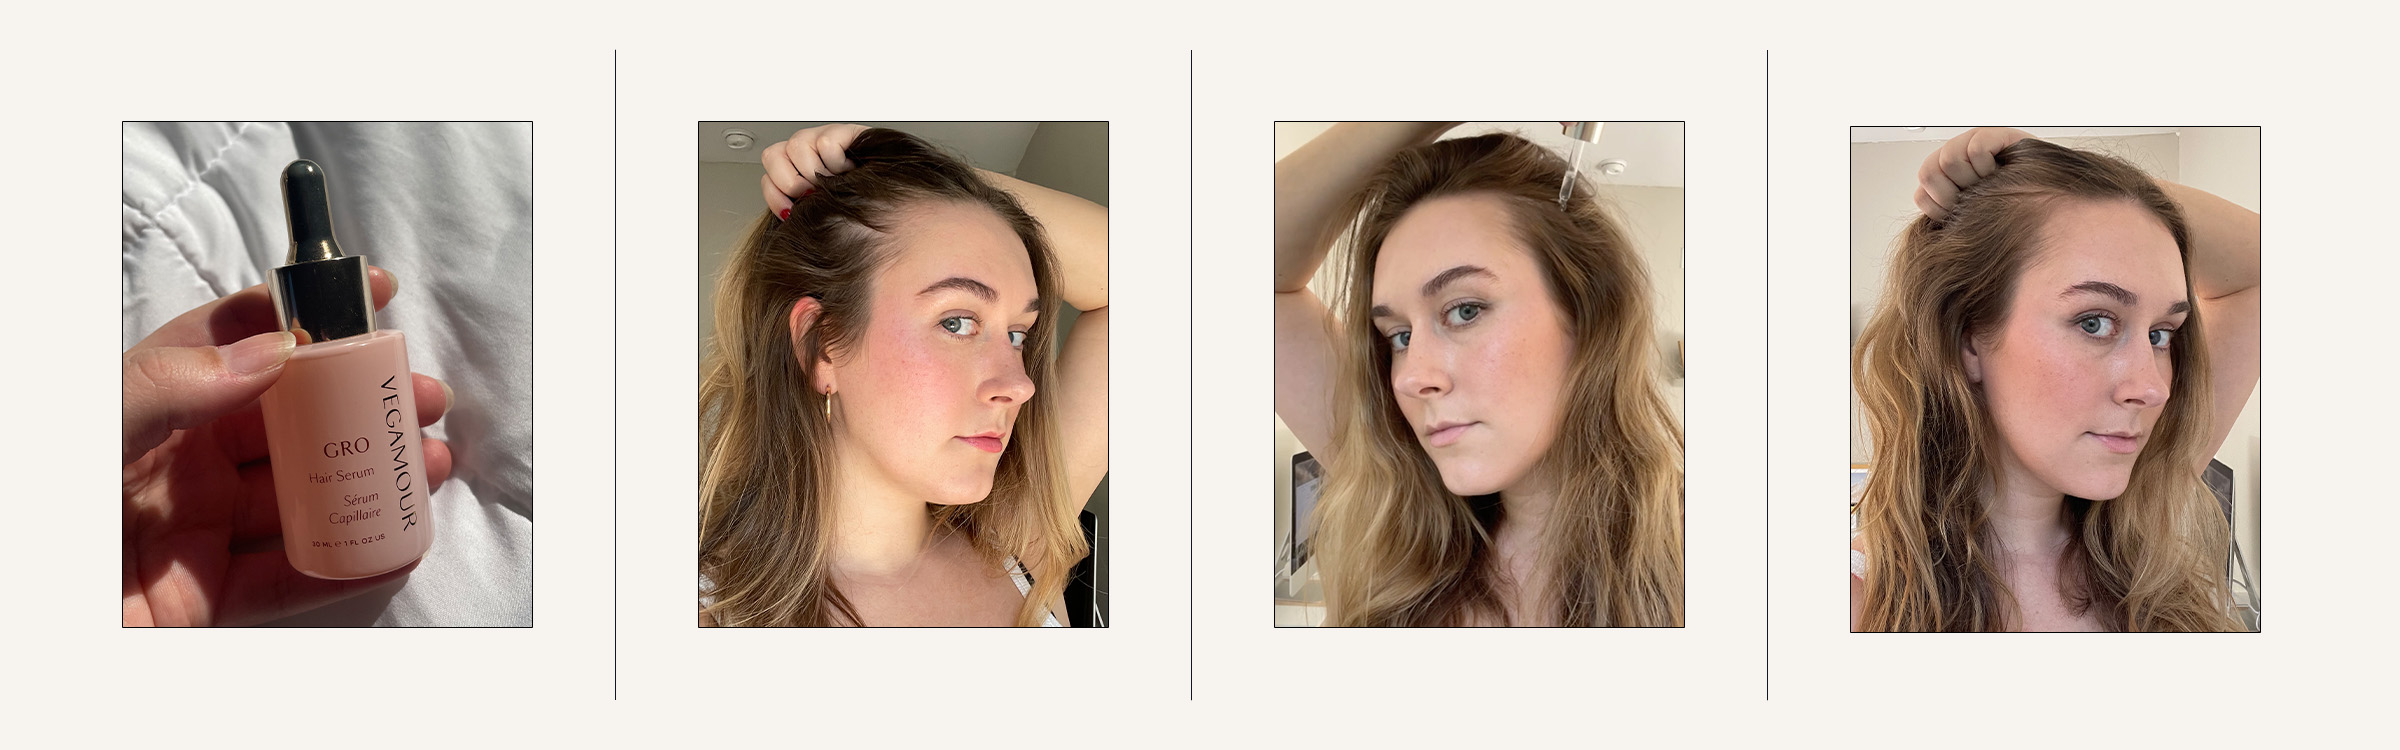 Hair Serums Never Worked on My Thin Hair—Then I Tried This Growth-Boosting One